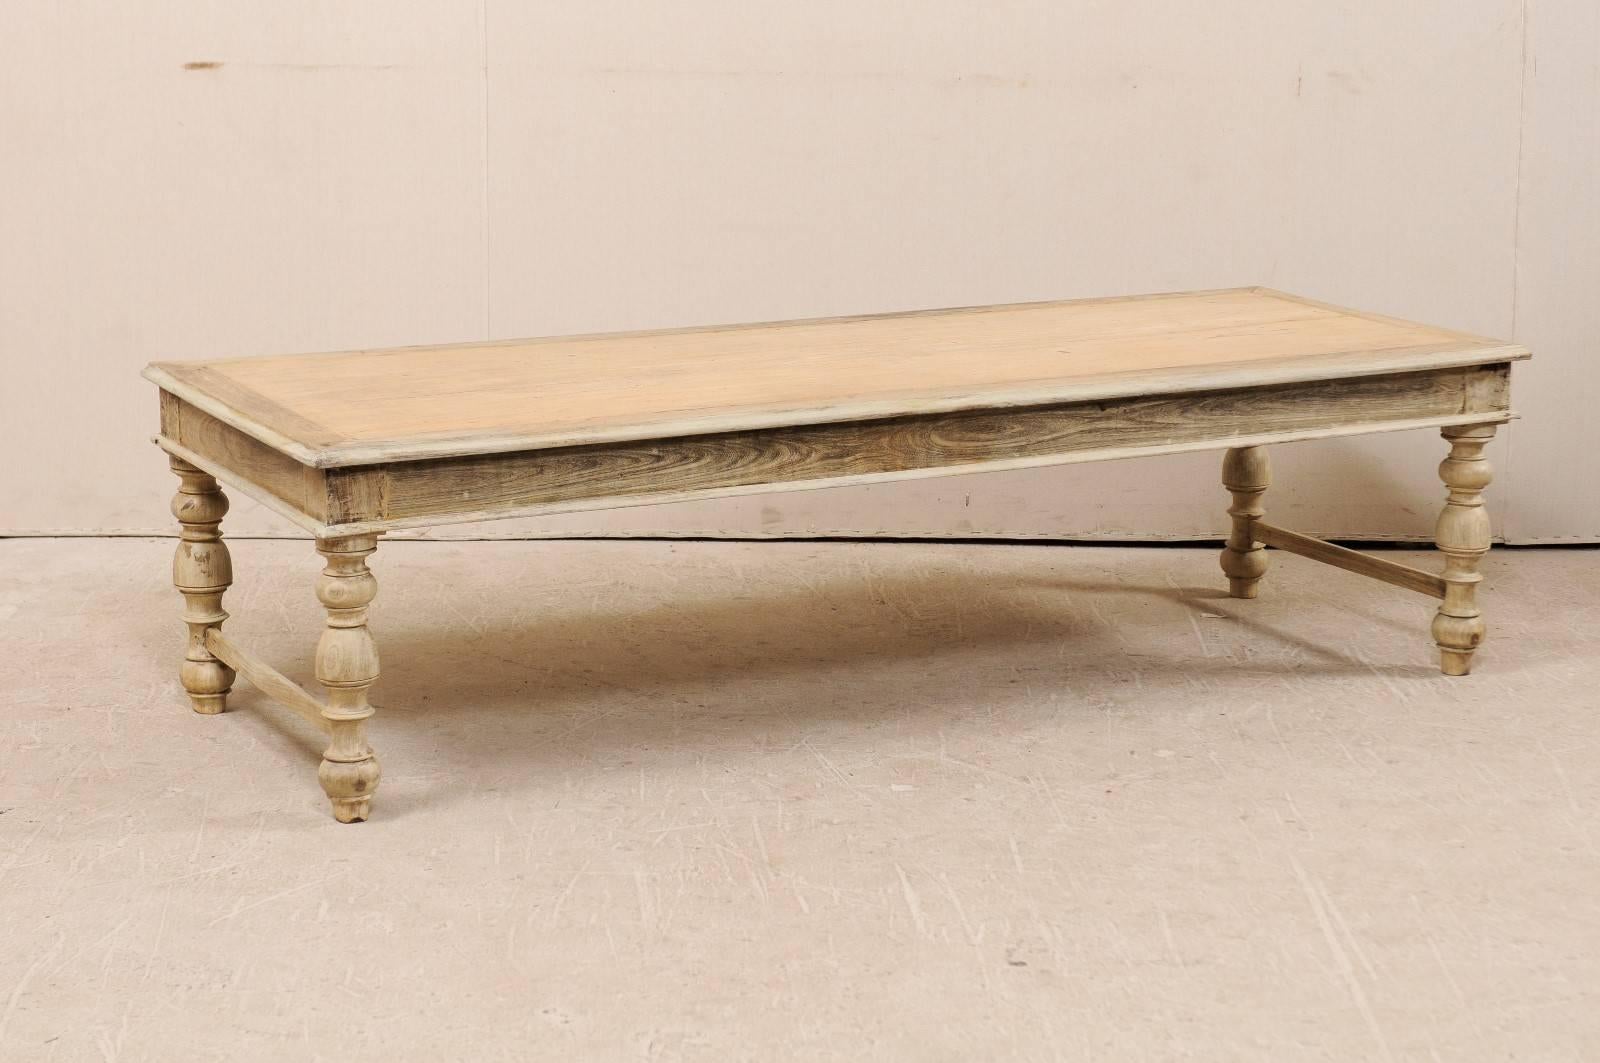 A Belgian mid-20th century wood coffee table. This Belgian coffee table of wood features a long, rectangular top and nicely turned legs. The skirt has nice, clean lines which mimic the top of this table. The legs are connected by a stretcher bar